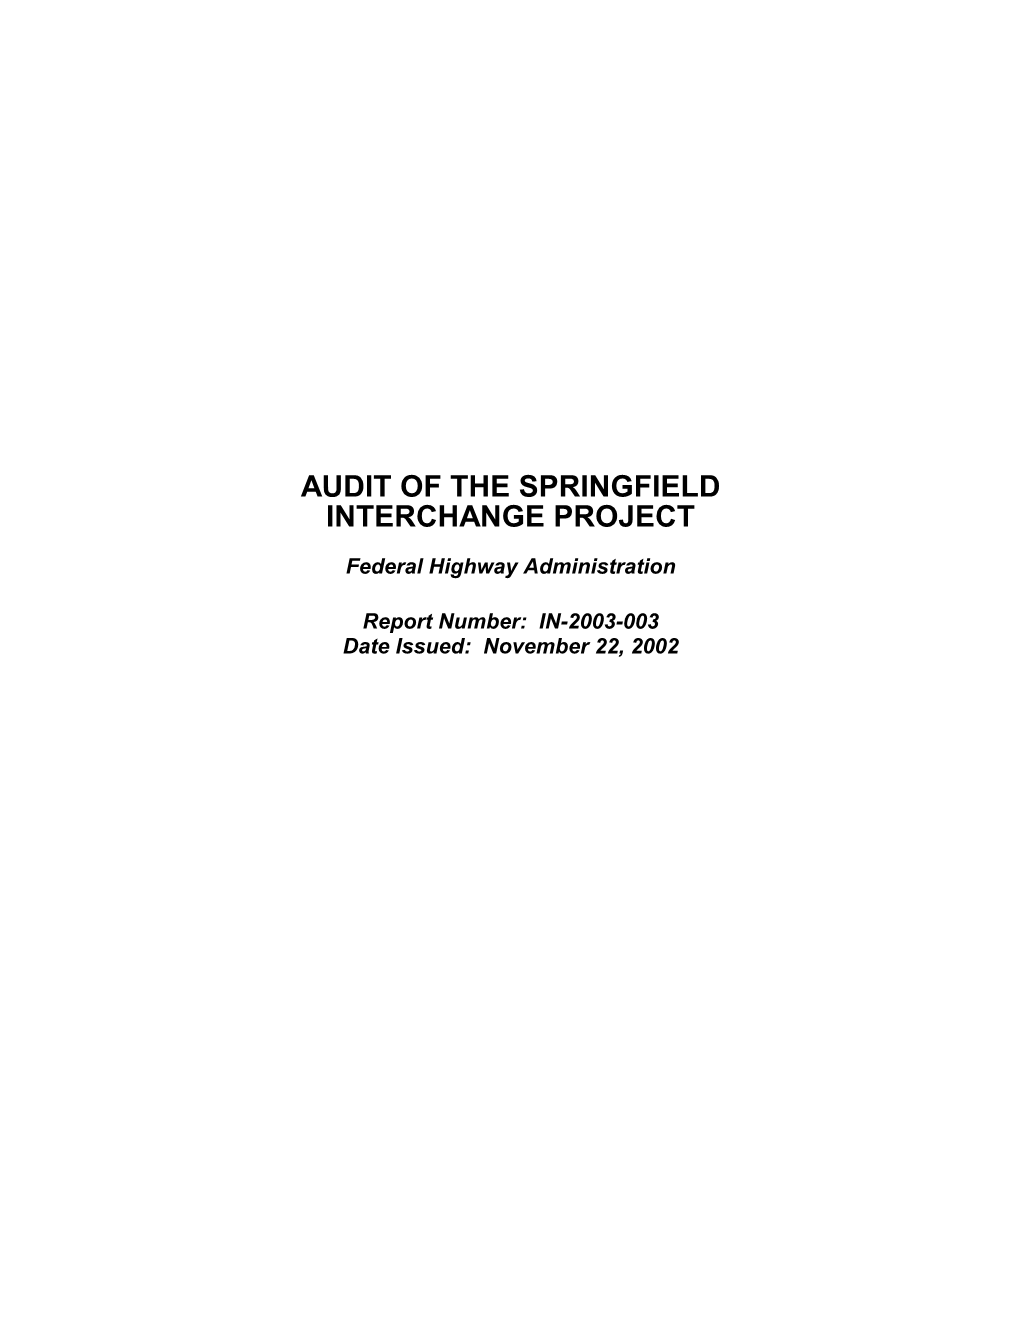 Audit of the Springfield Interchange Project